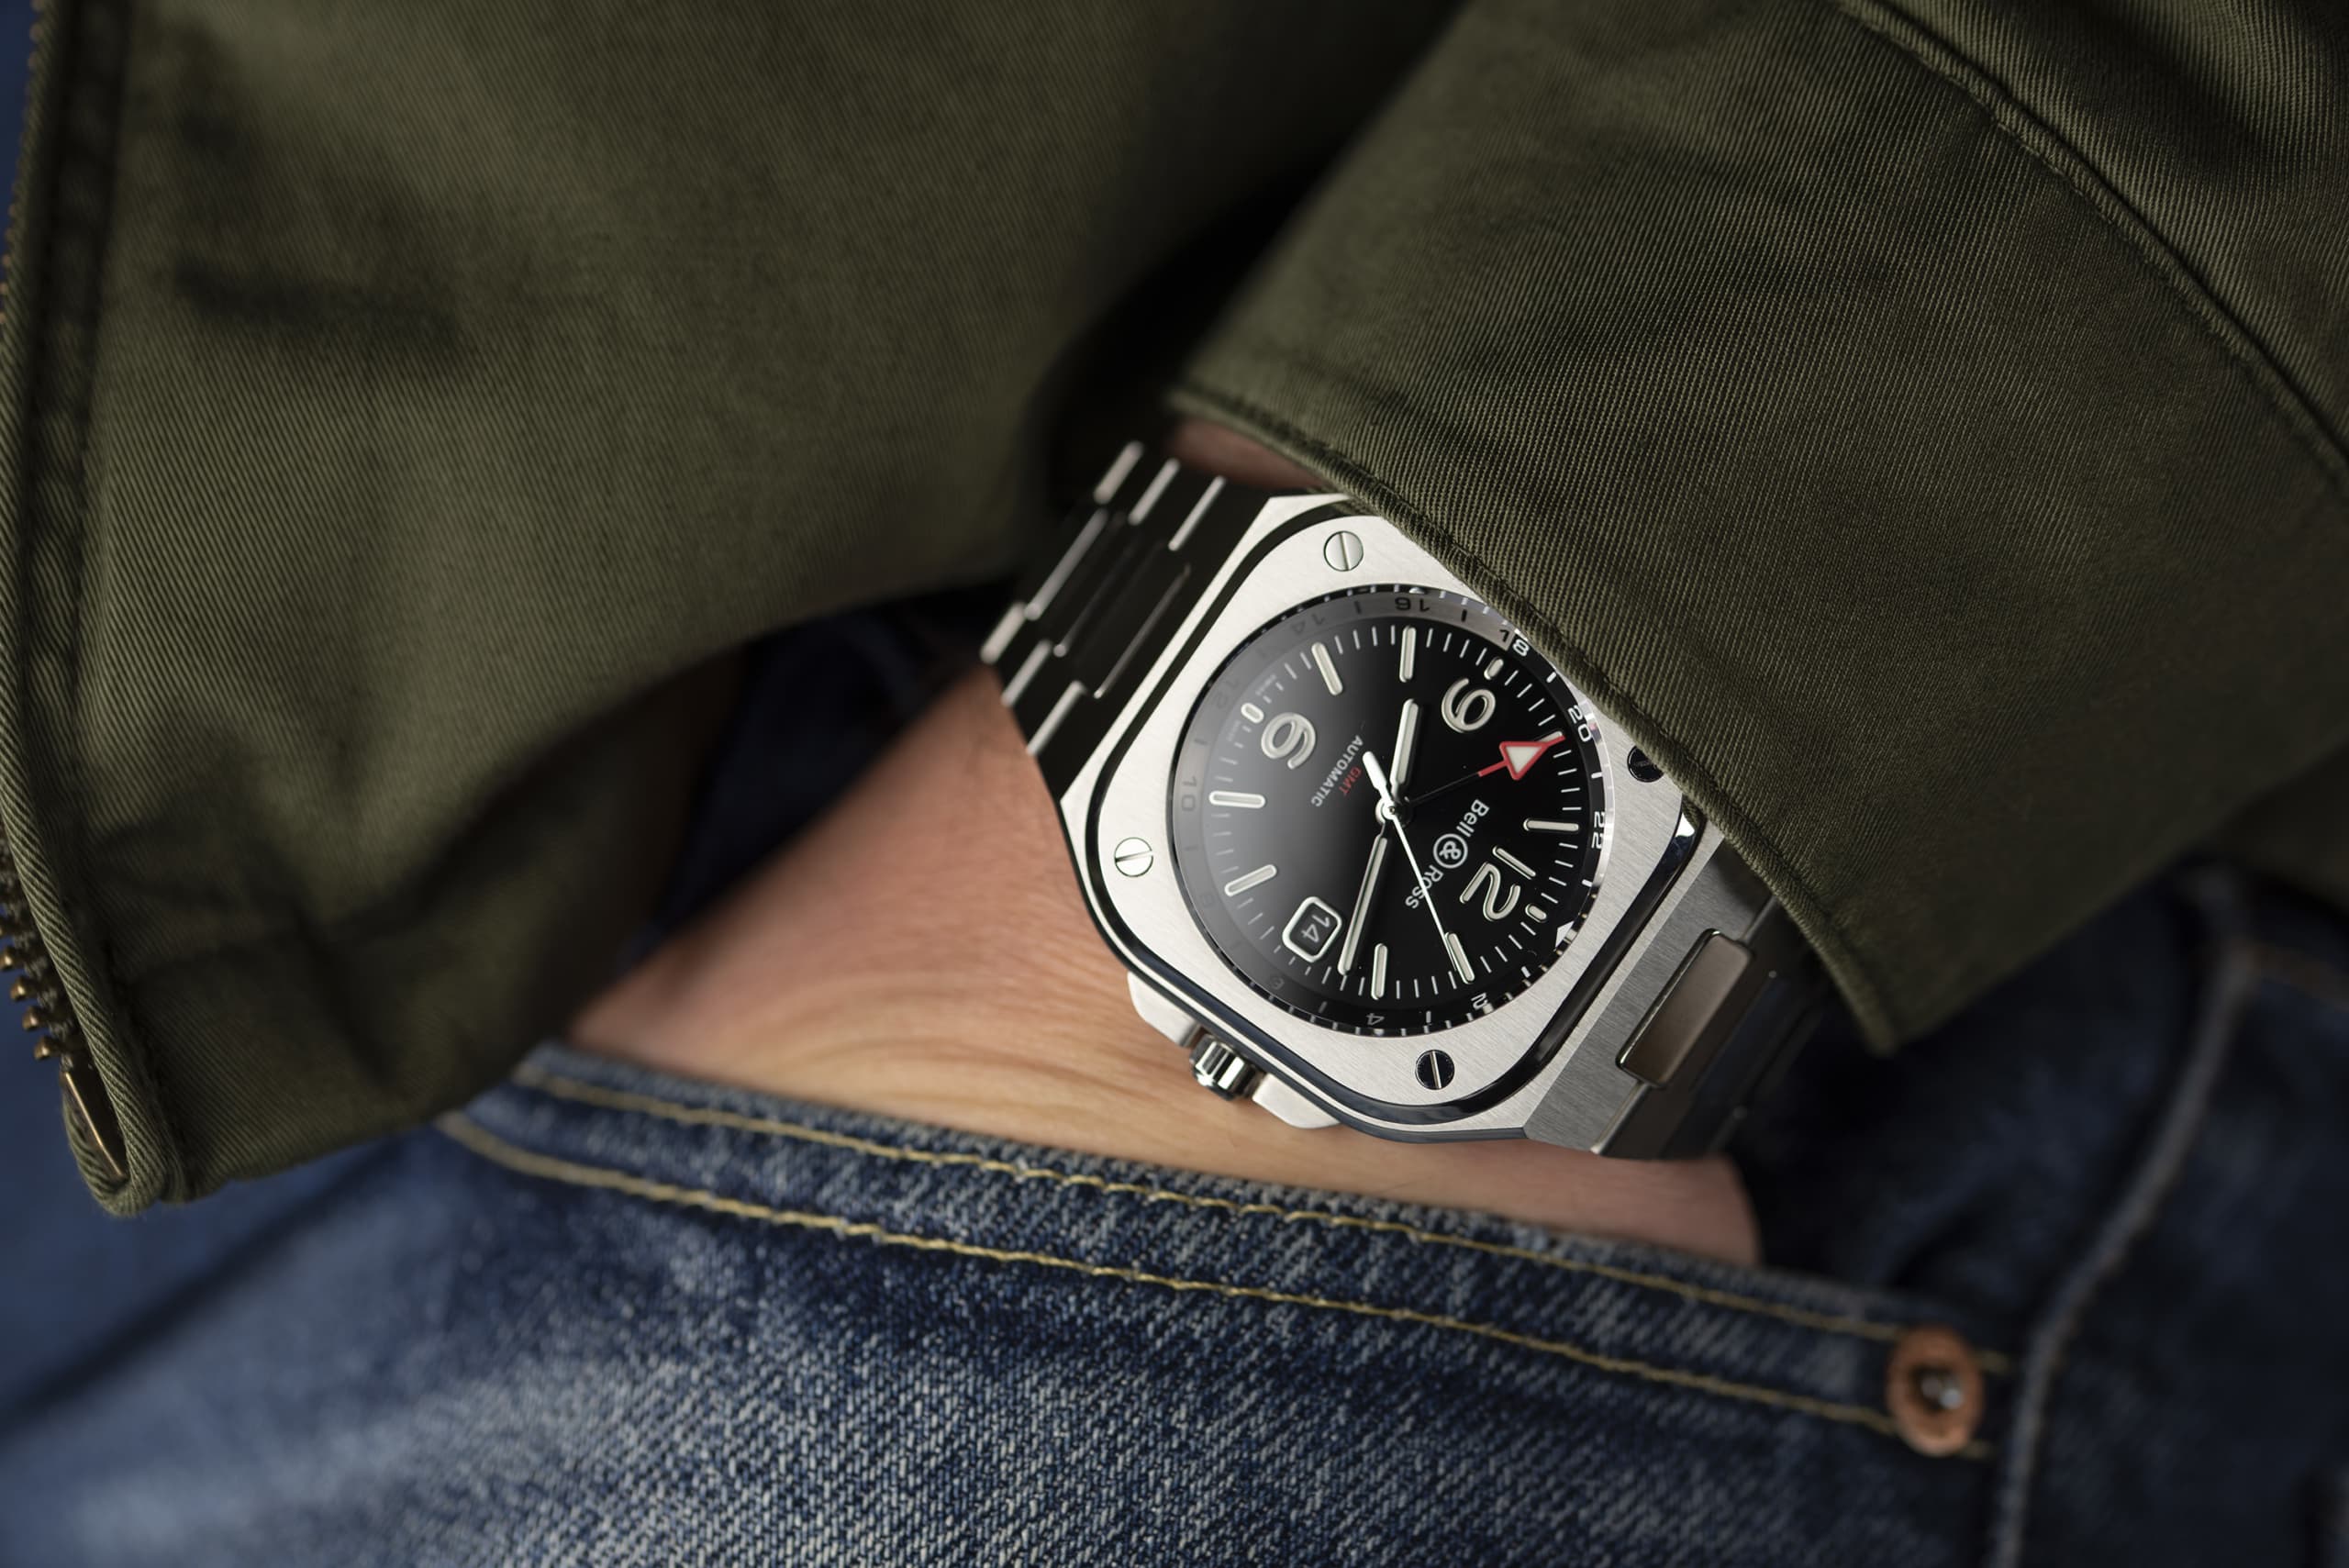 The Bell & Ross BR 05 Gets A GMT Hand